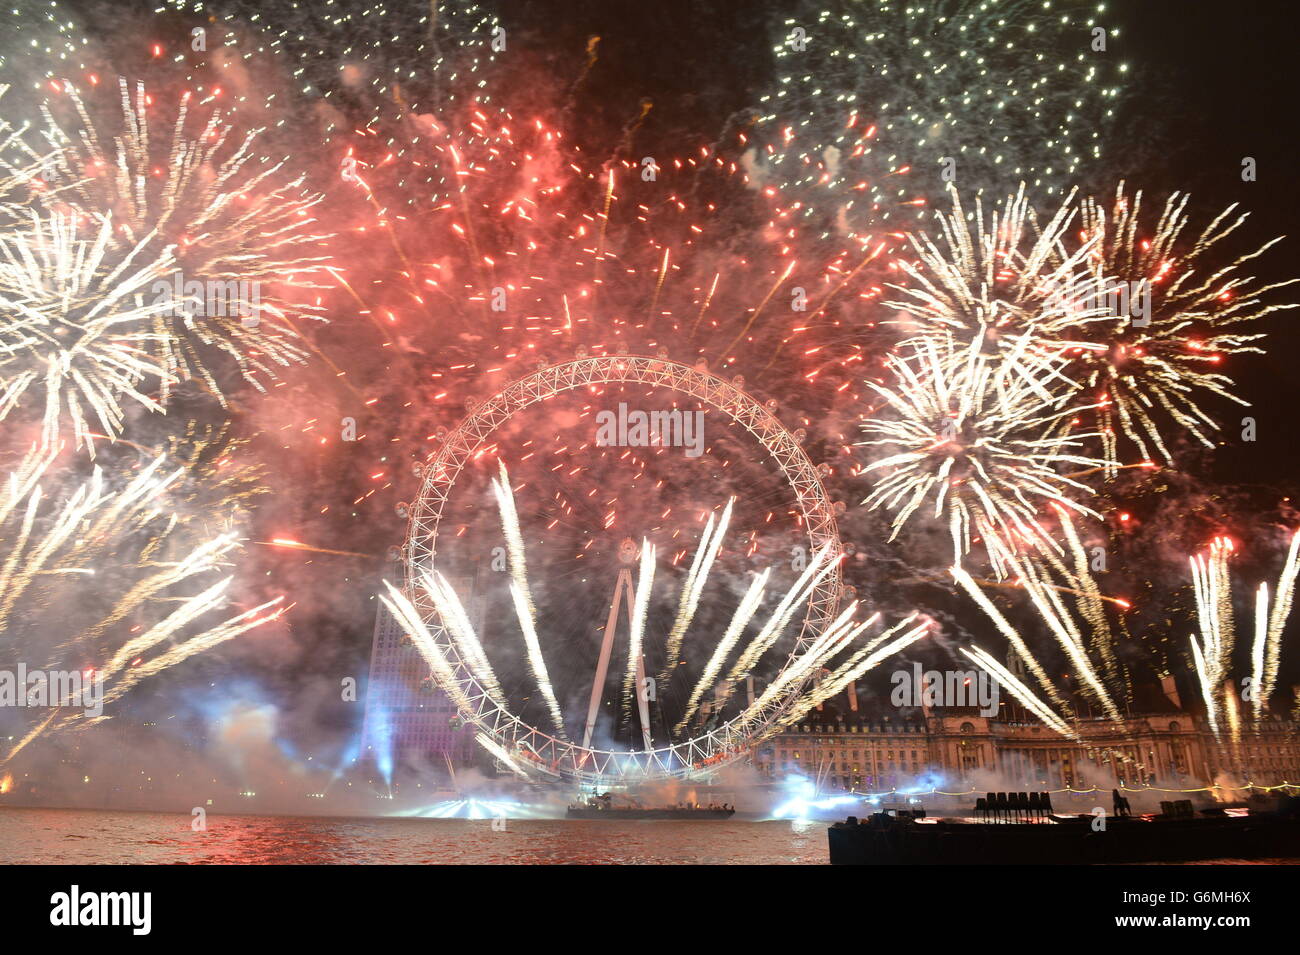 Fireworks light up the sky over the London Eye in central London during the New Year celebrations. Stock Photo